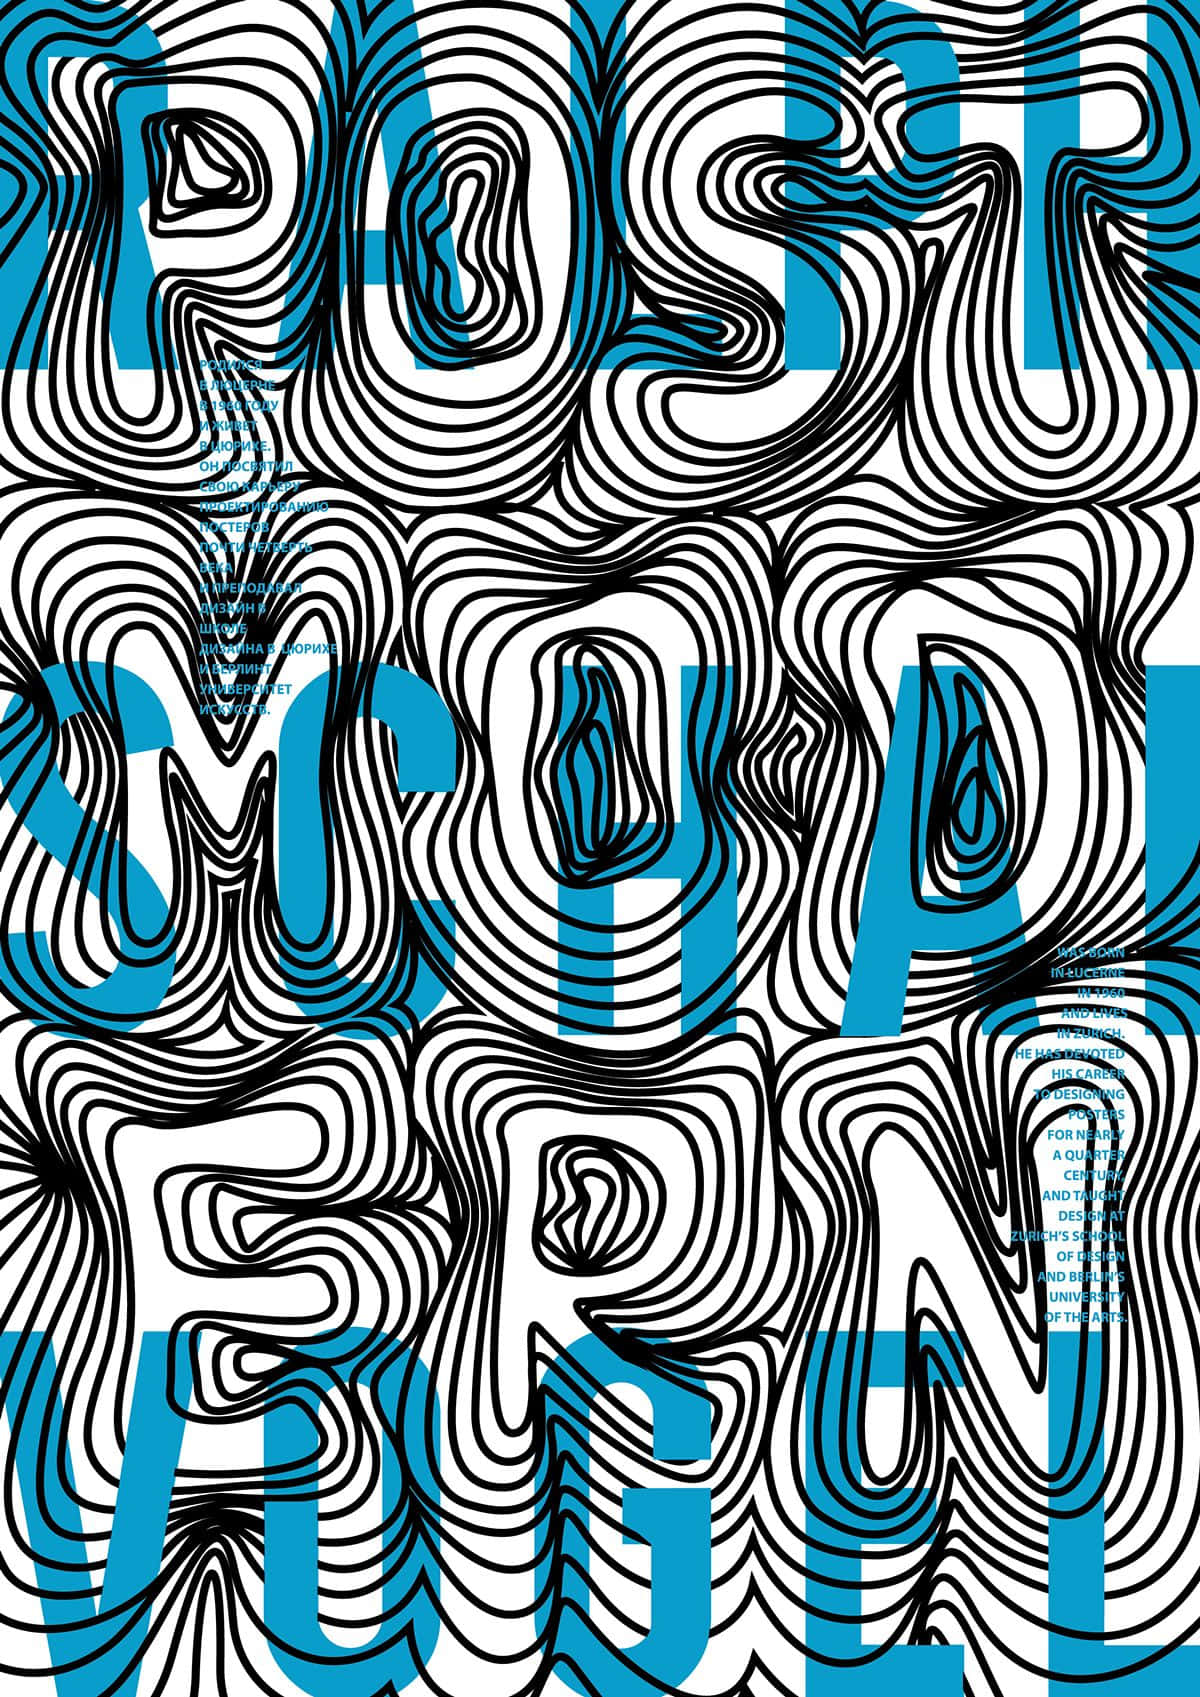 "Postmodernism is a movement marked by the reevaluation of established norms and the questioning of truth." Wallpaper